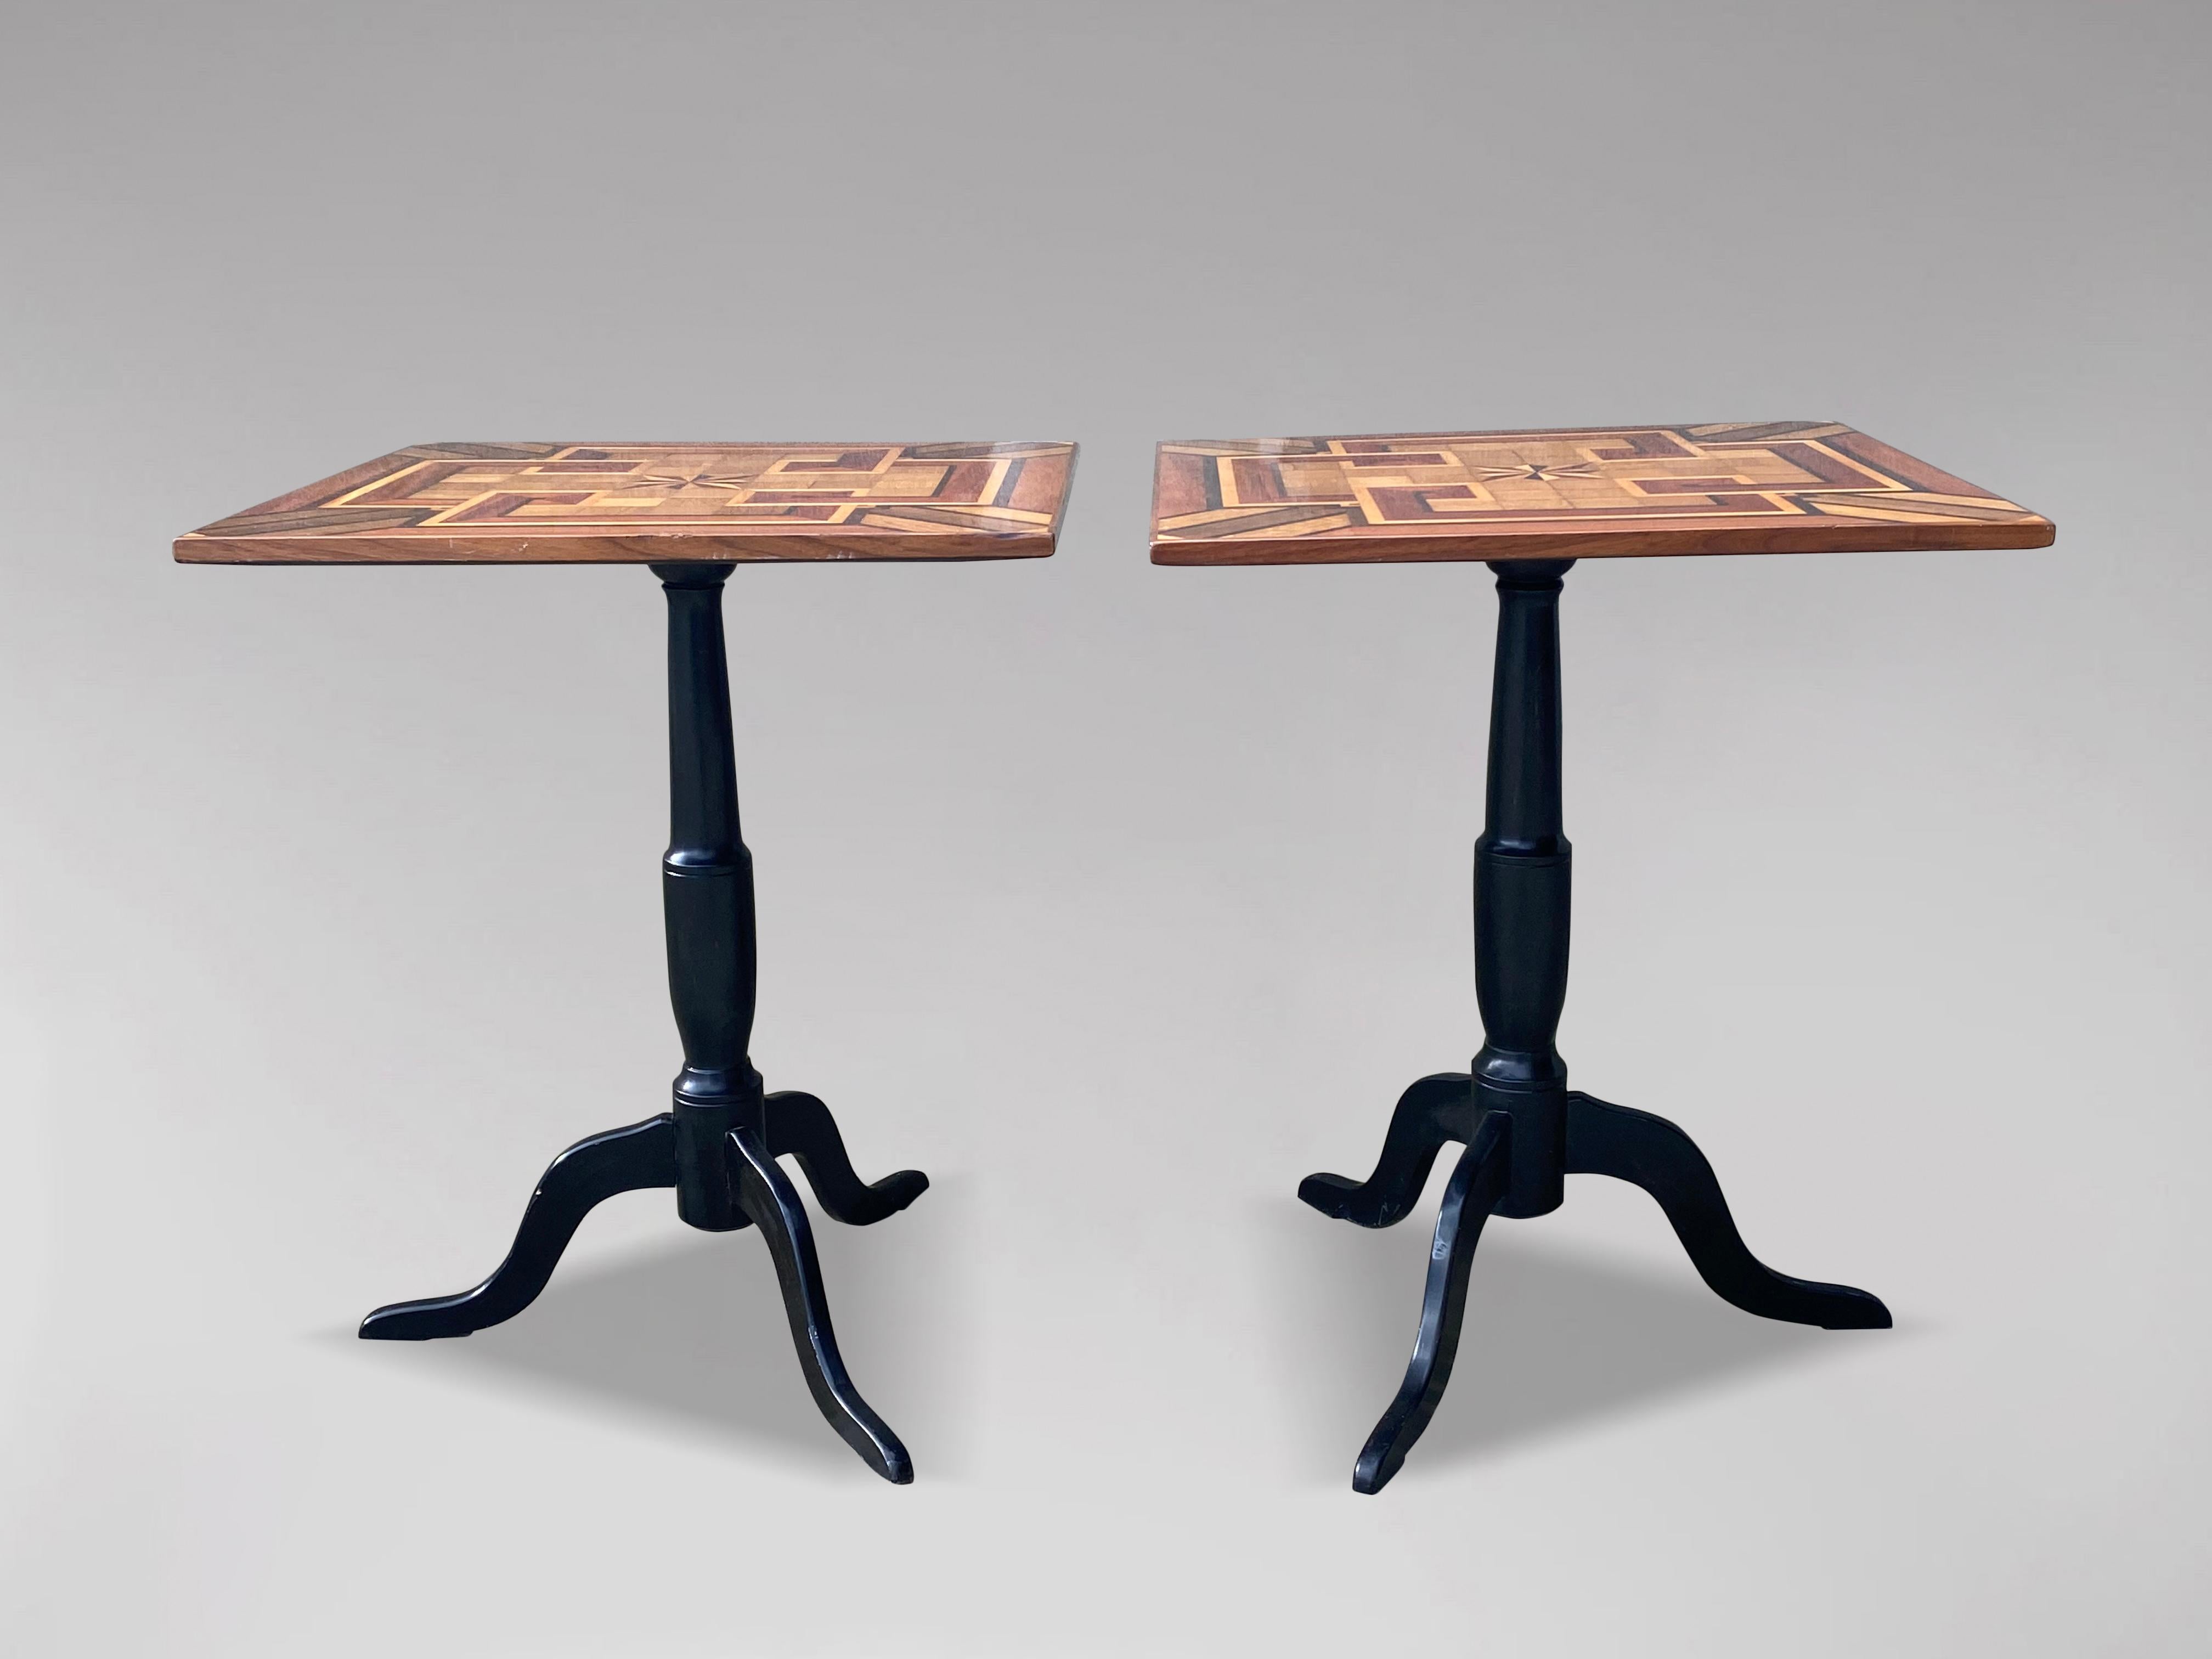 Pair of 19th Century Geometric Inlay & Marquetry Side Tables In Good Condition For Sale In Petworth,West Sussex, GB